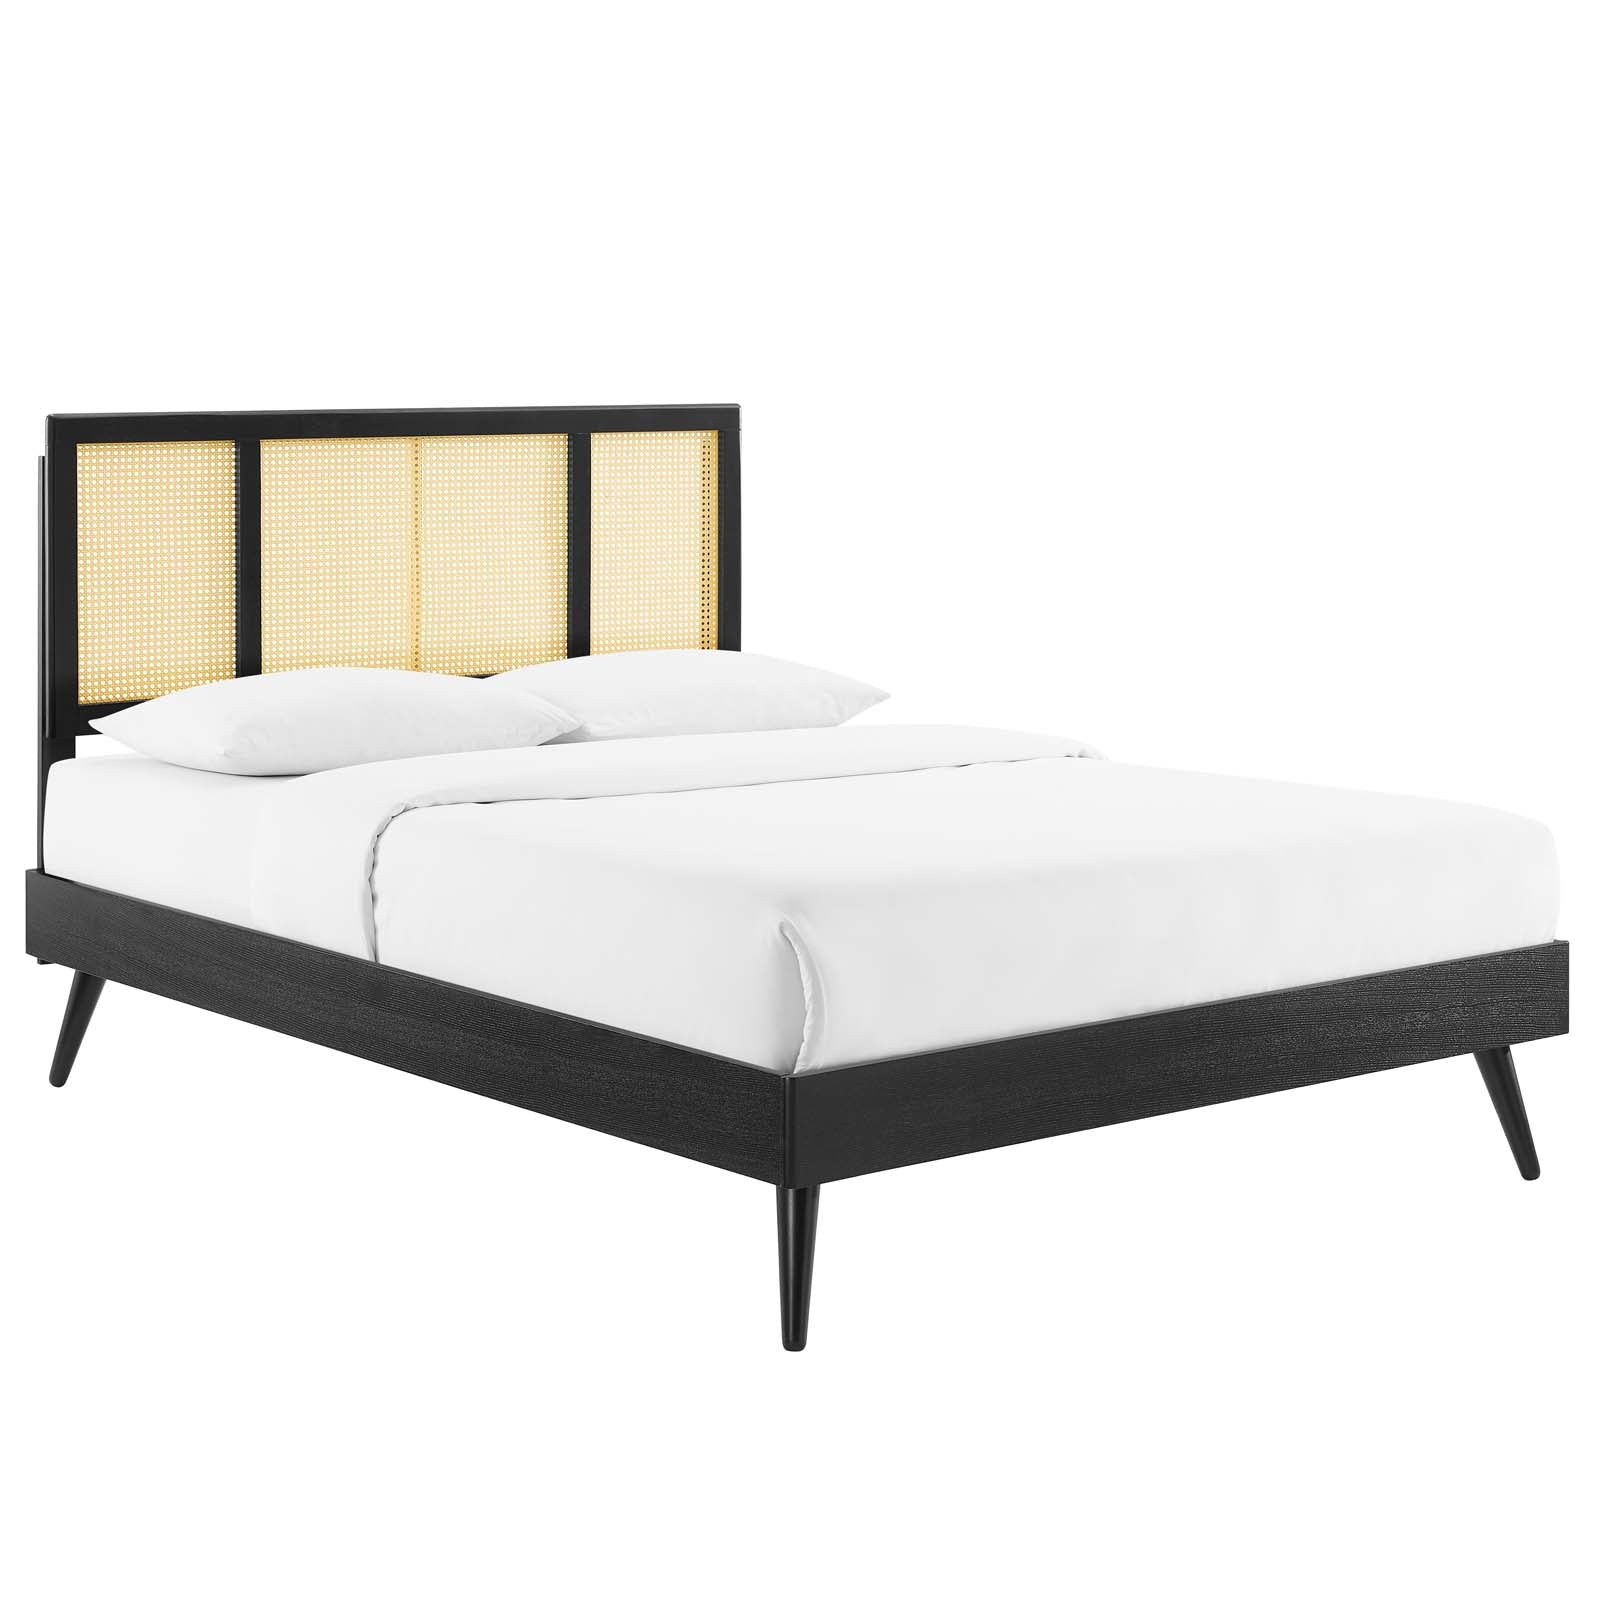 Kelsea Cane and Wood Platform Bed With Splayed Legs - East Shore Modern Home Furnishings